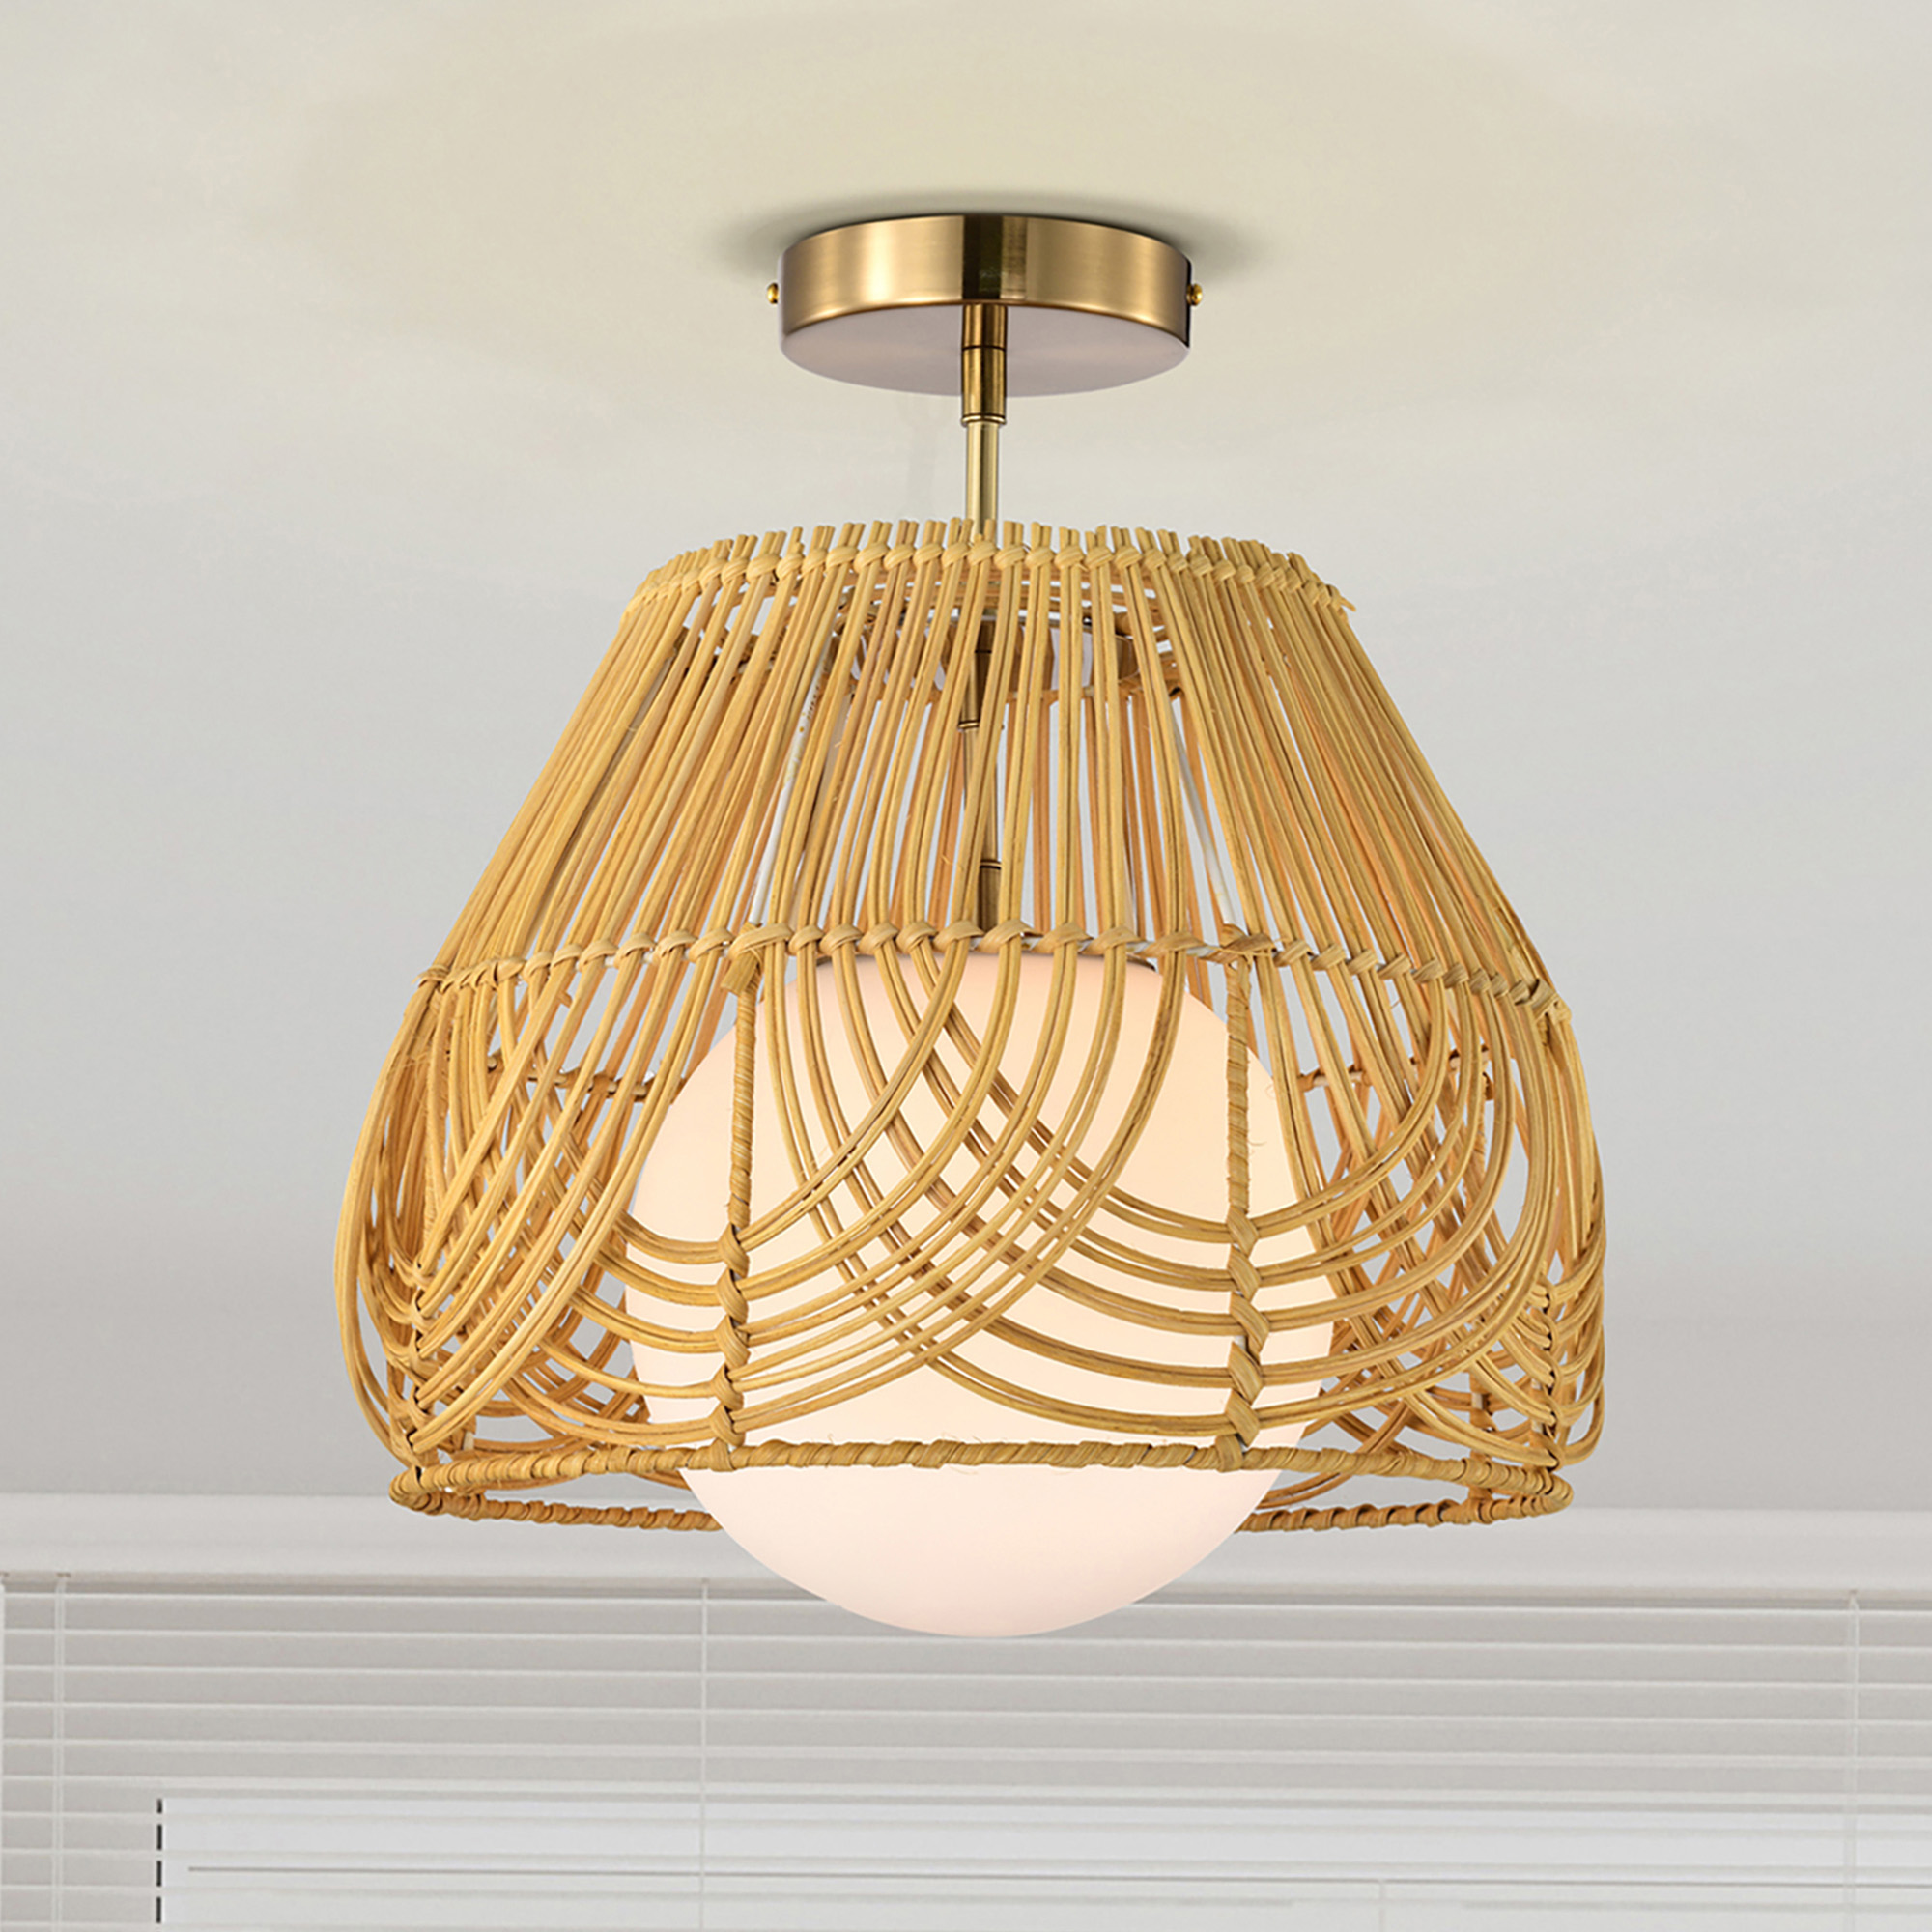 Lada 13 in. 1-Light Indoor Brass and Woven Rattan Finish Semi-Flush Mount Ceiling Light with Light Kit